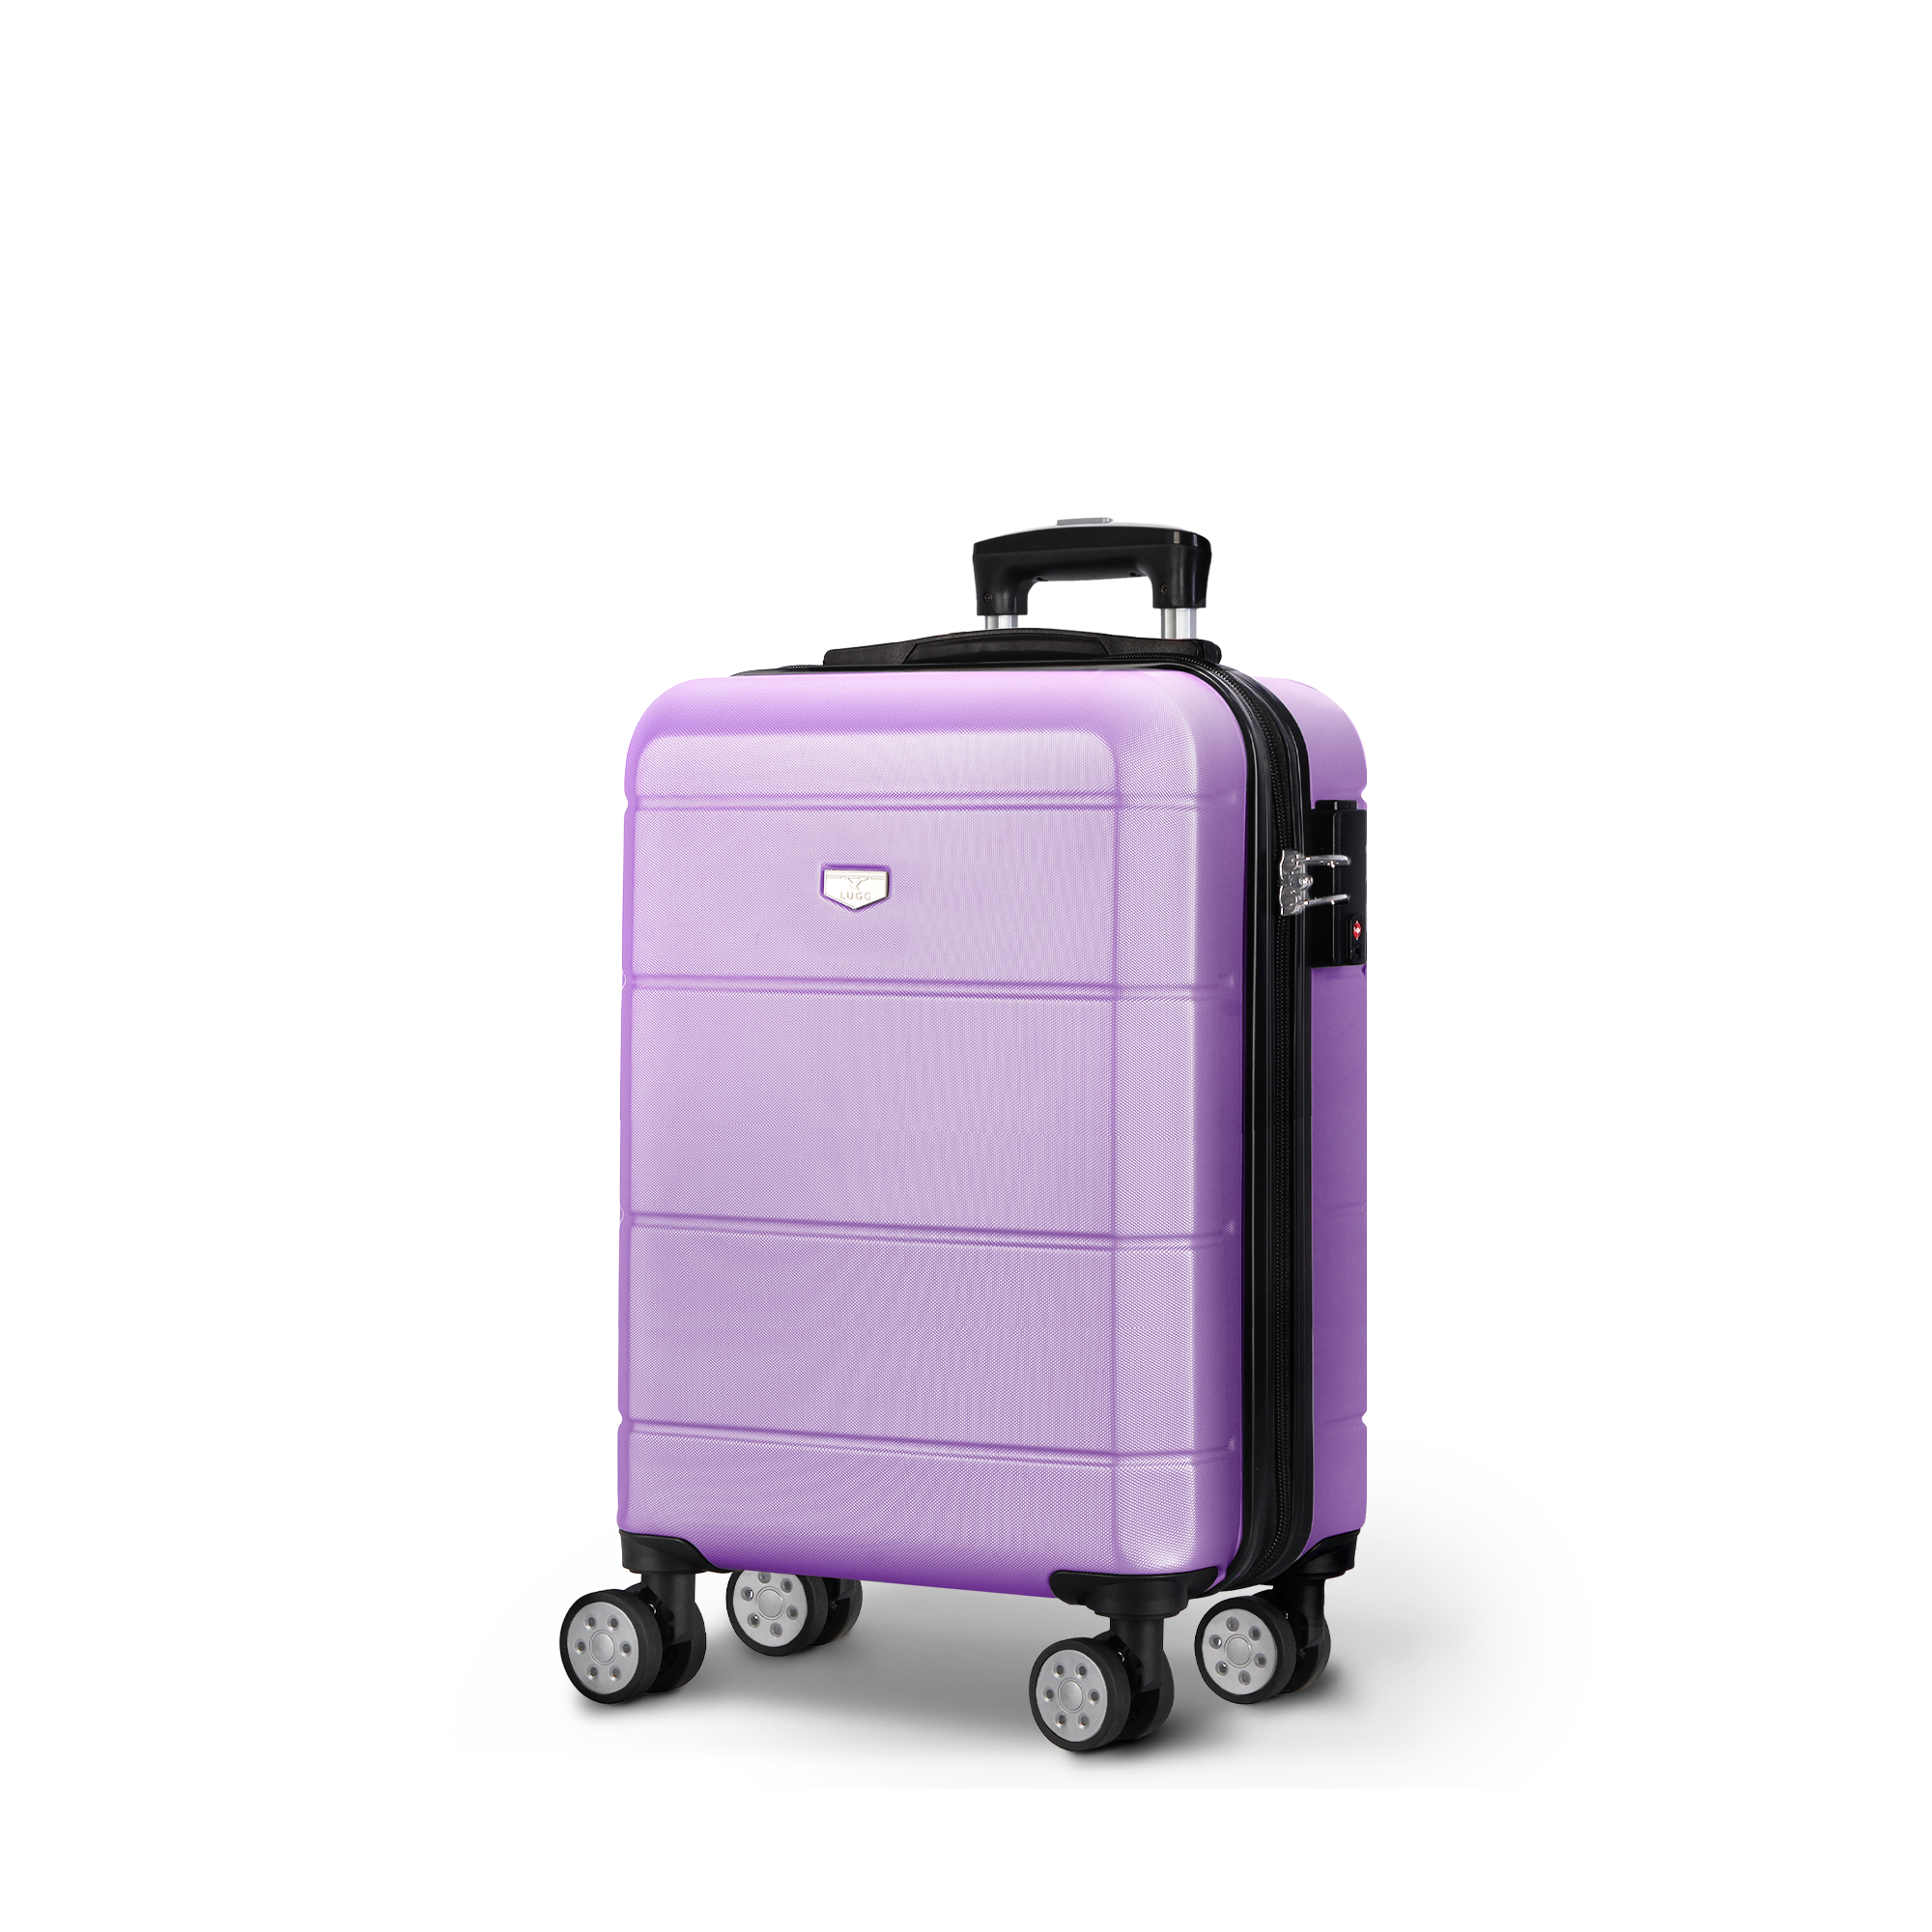 Jetset 20-inch Suitcase in Lavender